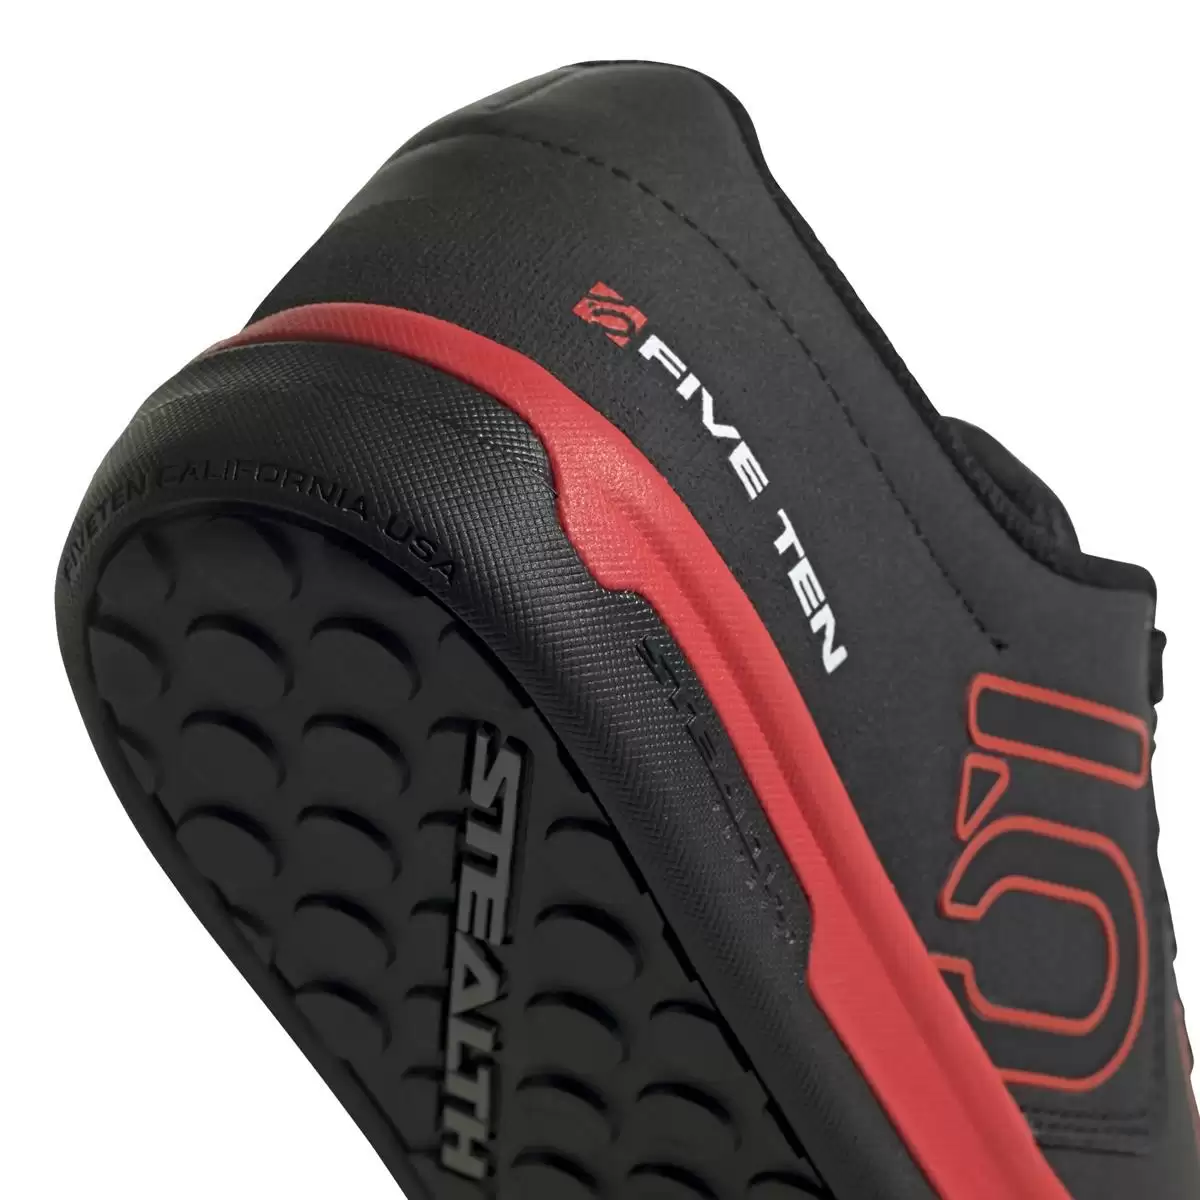 MTB Flat Shoes Freerider Pro Black/Red Size 38,5 #5